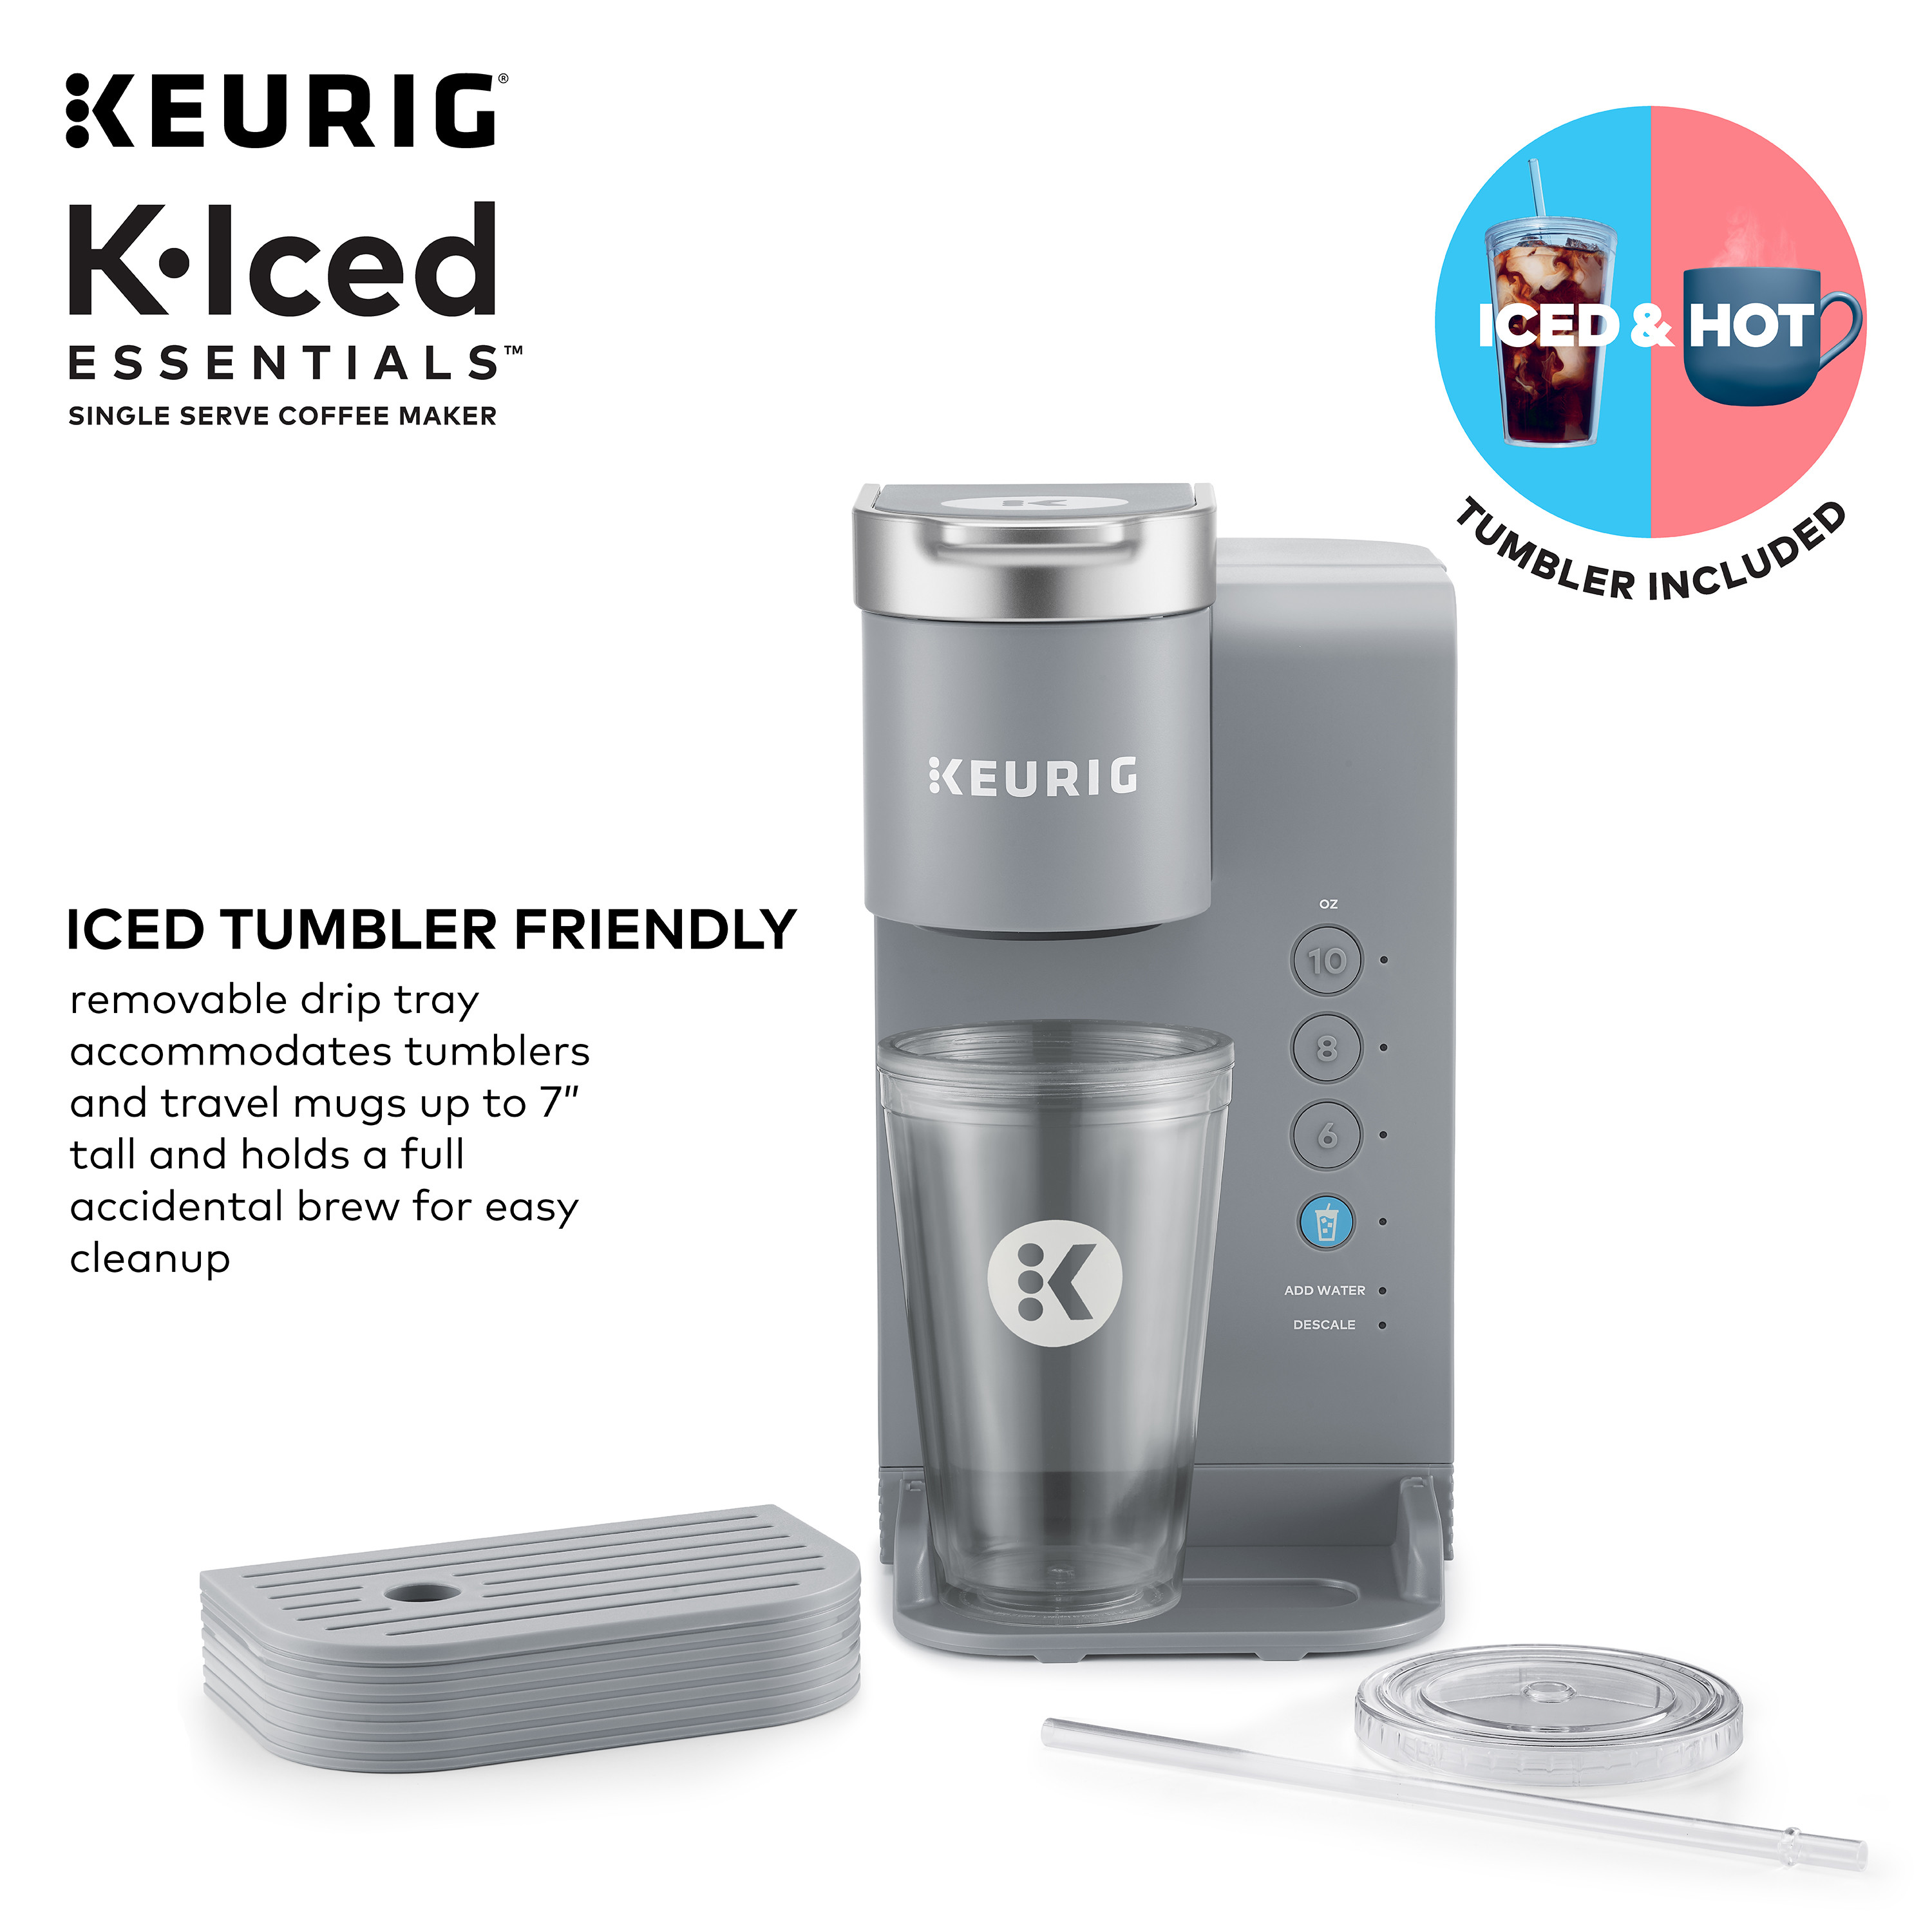 Keurig K-Iced Essentials Gray Iced and Hot Single-Serve K-Cup Pod Coffee Maker - image 4 of 16